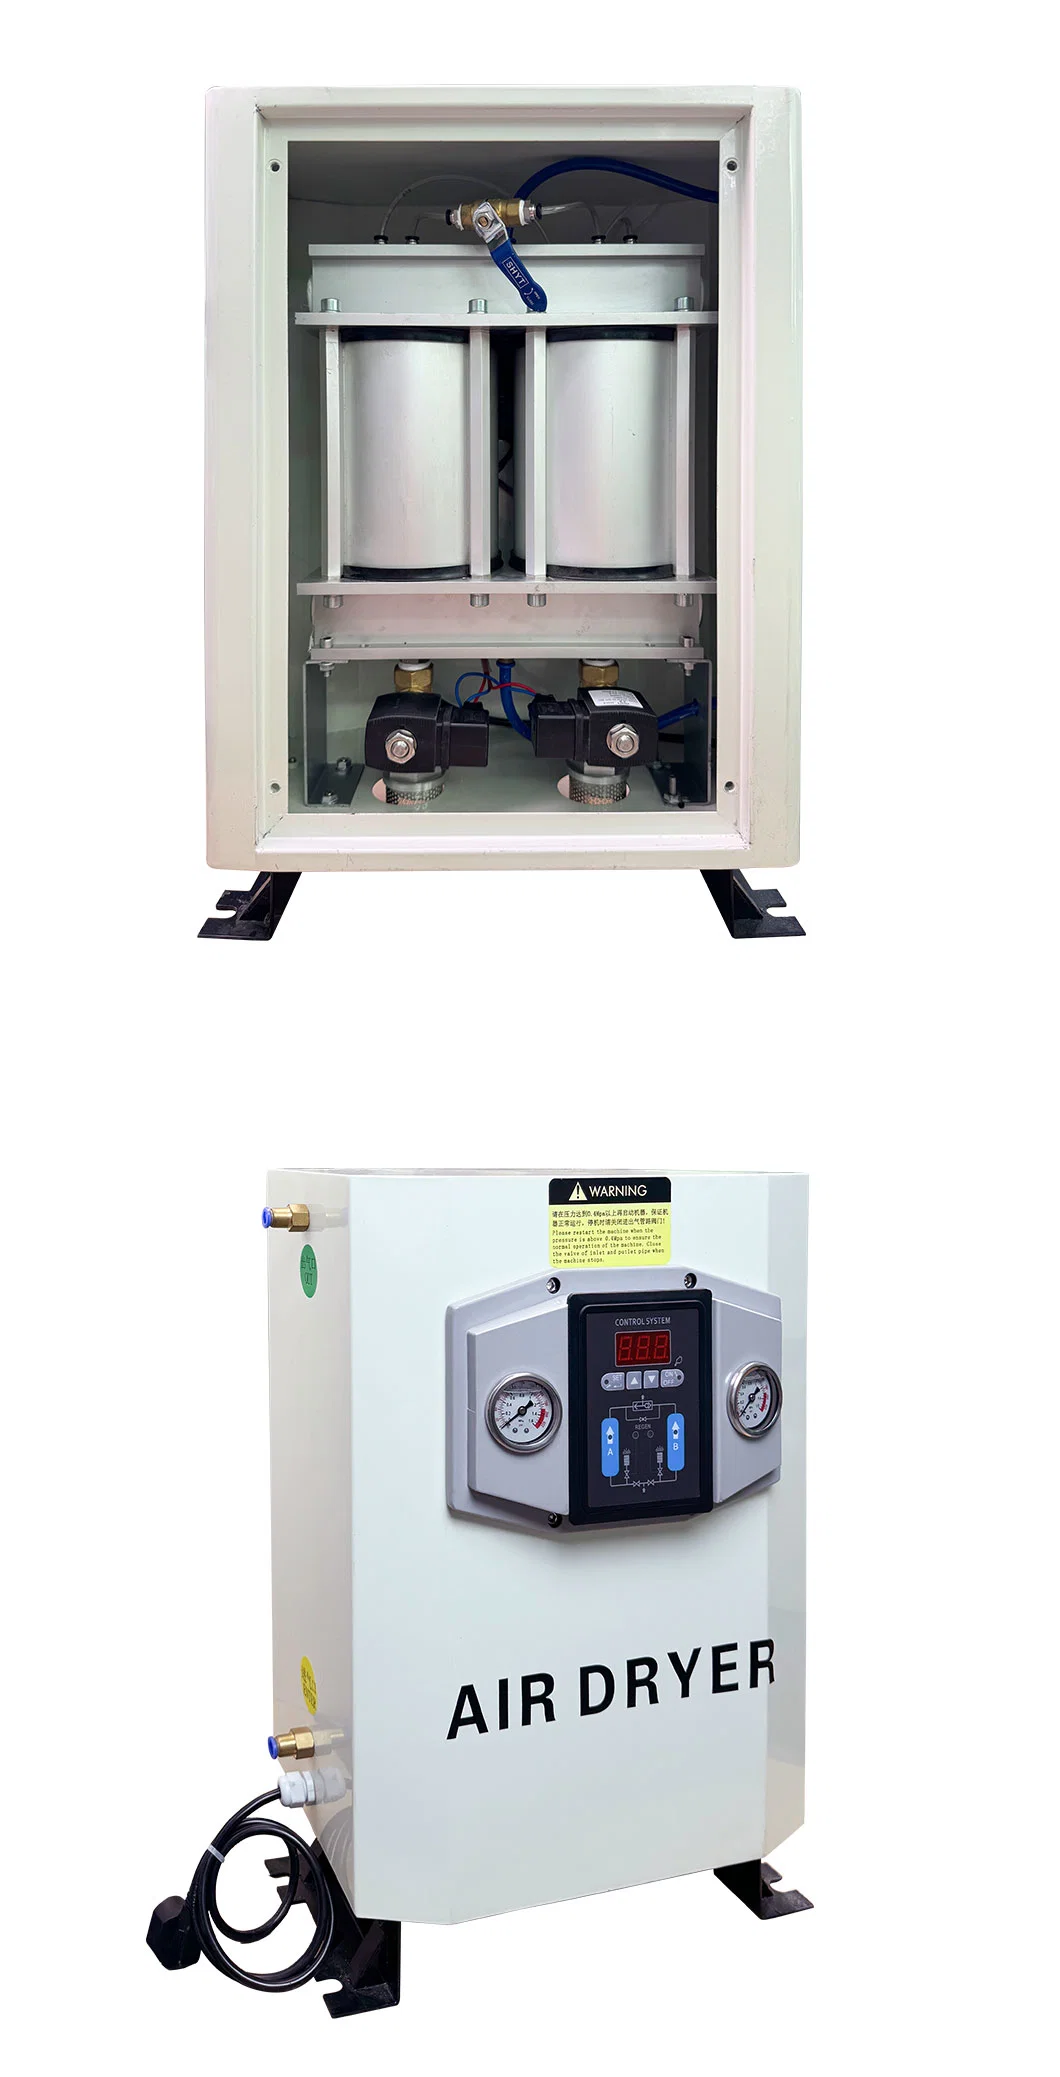 Affordable Dehumidification Compressor Air Dryer Desiccant Non-Thermal Adsorption Dryer